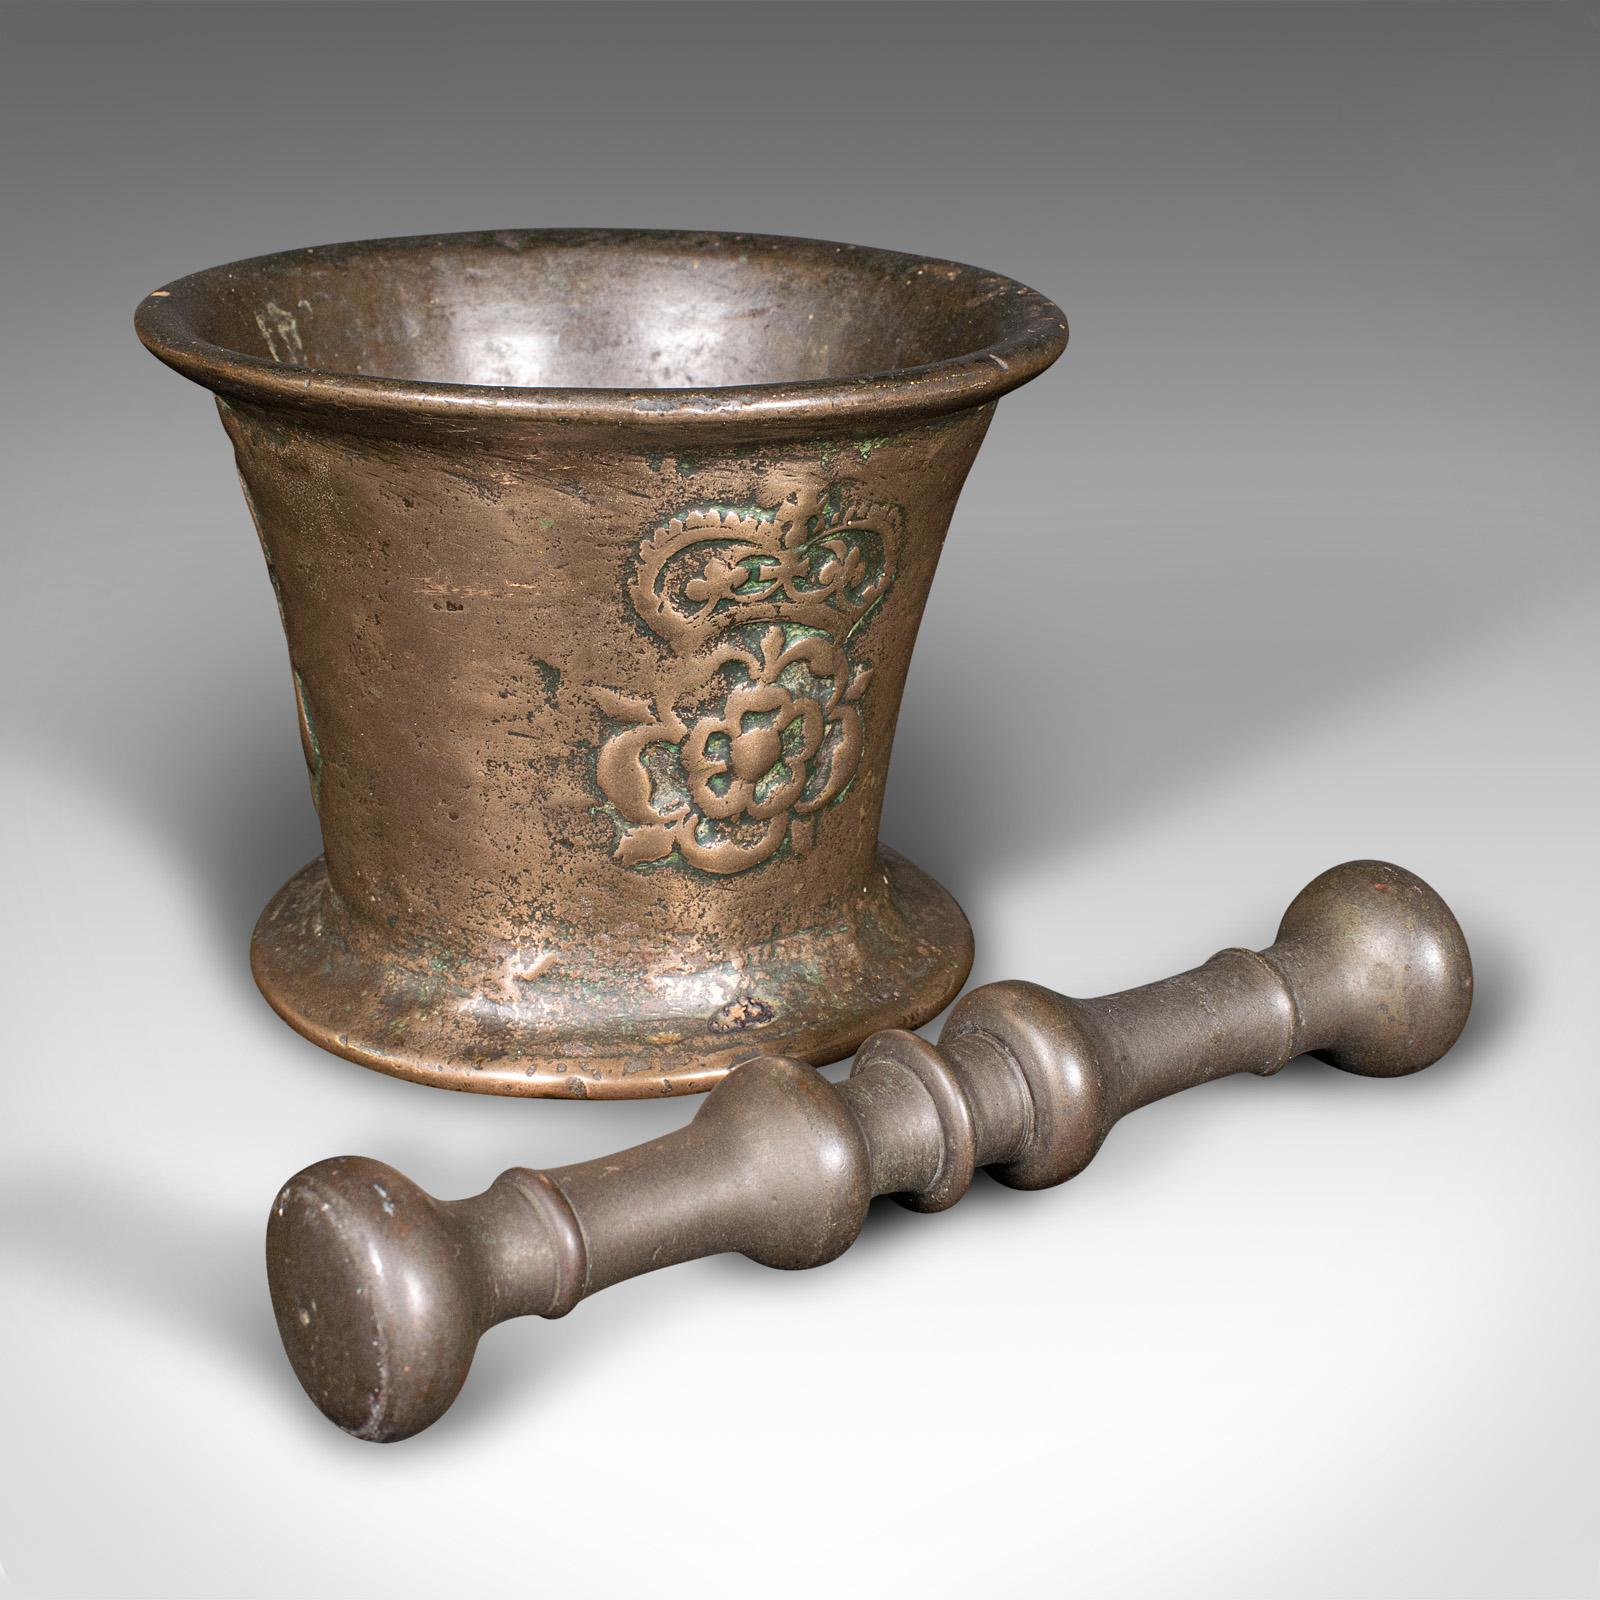 This is an antique Tudor Rose mortar and pestle. An English, bronze apothecary instrument, dating to the mid 17th century, circa 1650.

Accessorise your counter tops with this delightful mortar & pestle
Displays a desirable aged patina and in good